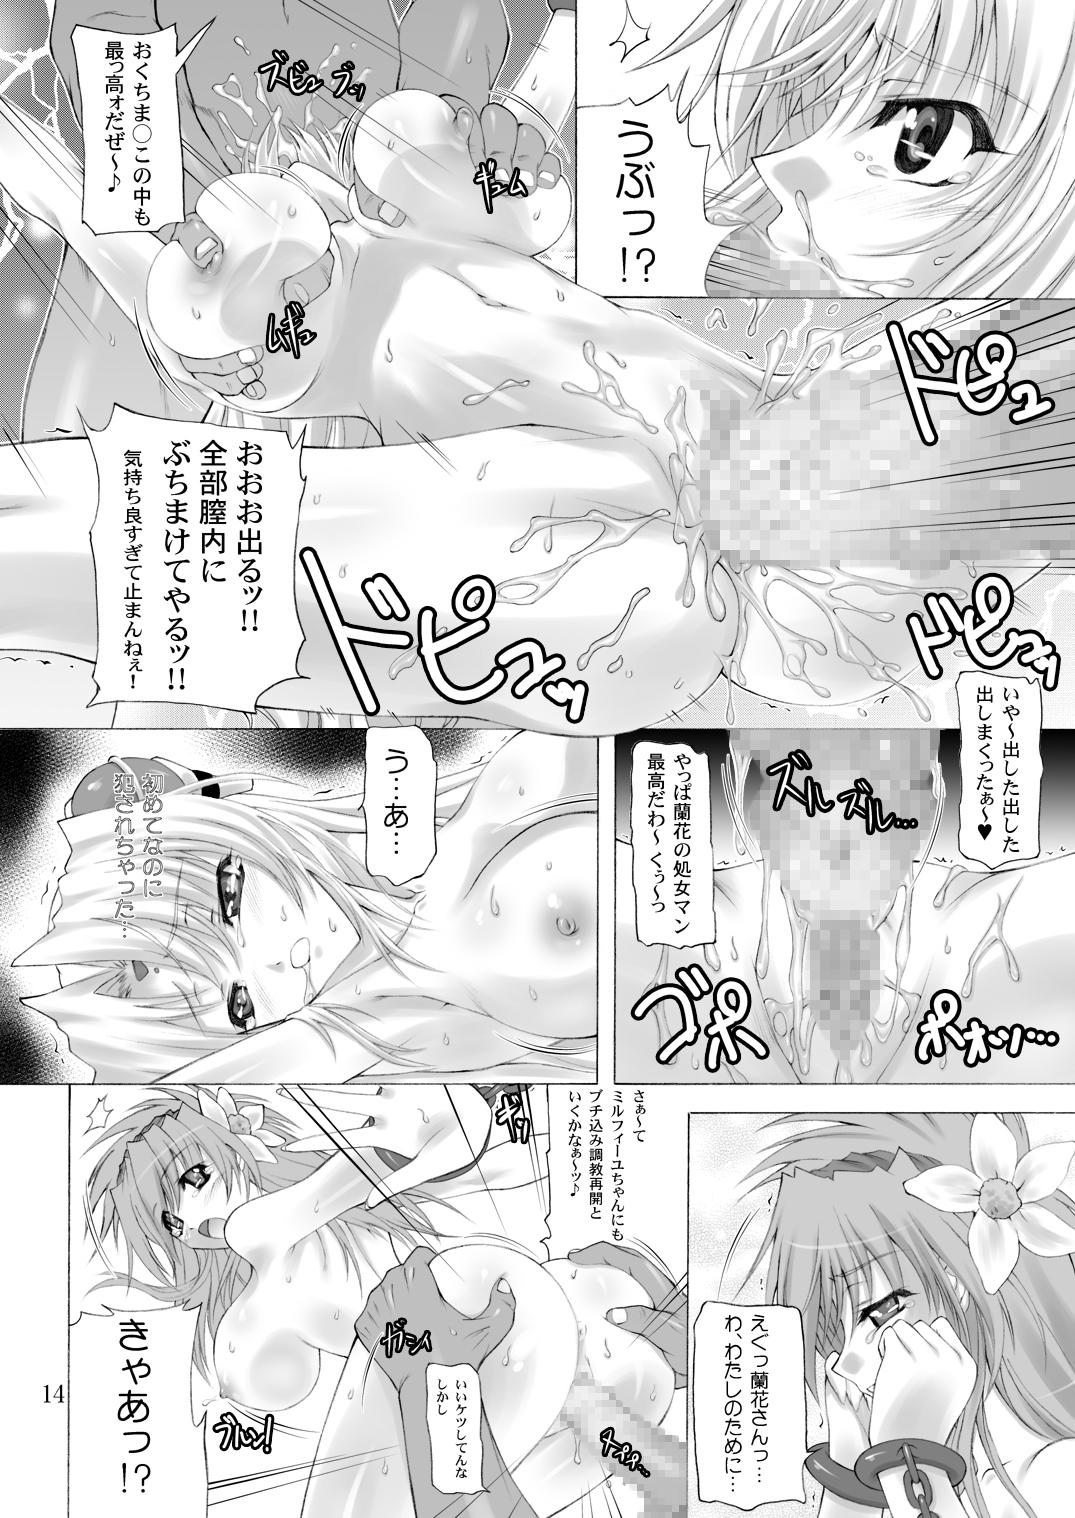 Sucking Super Rinpha Time! - Galaxy angel Indonesian - Page 13